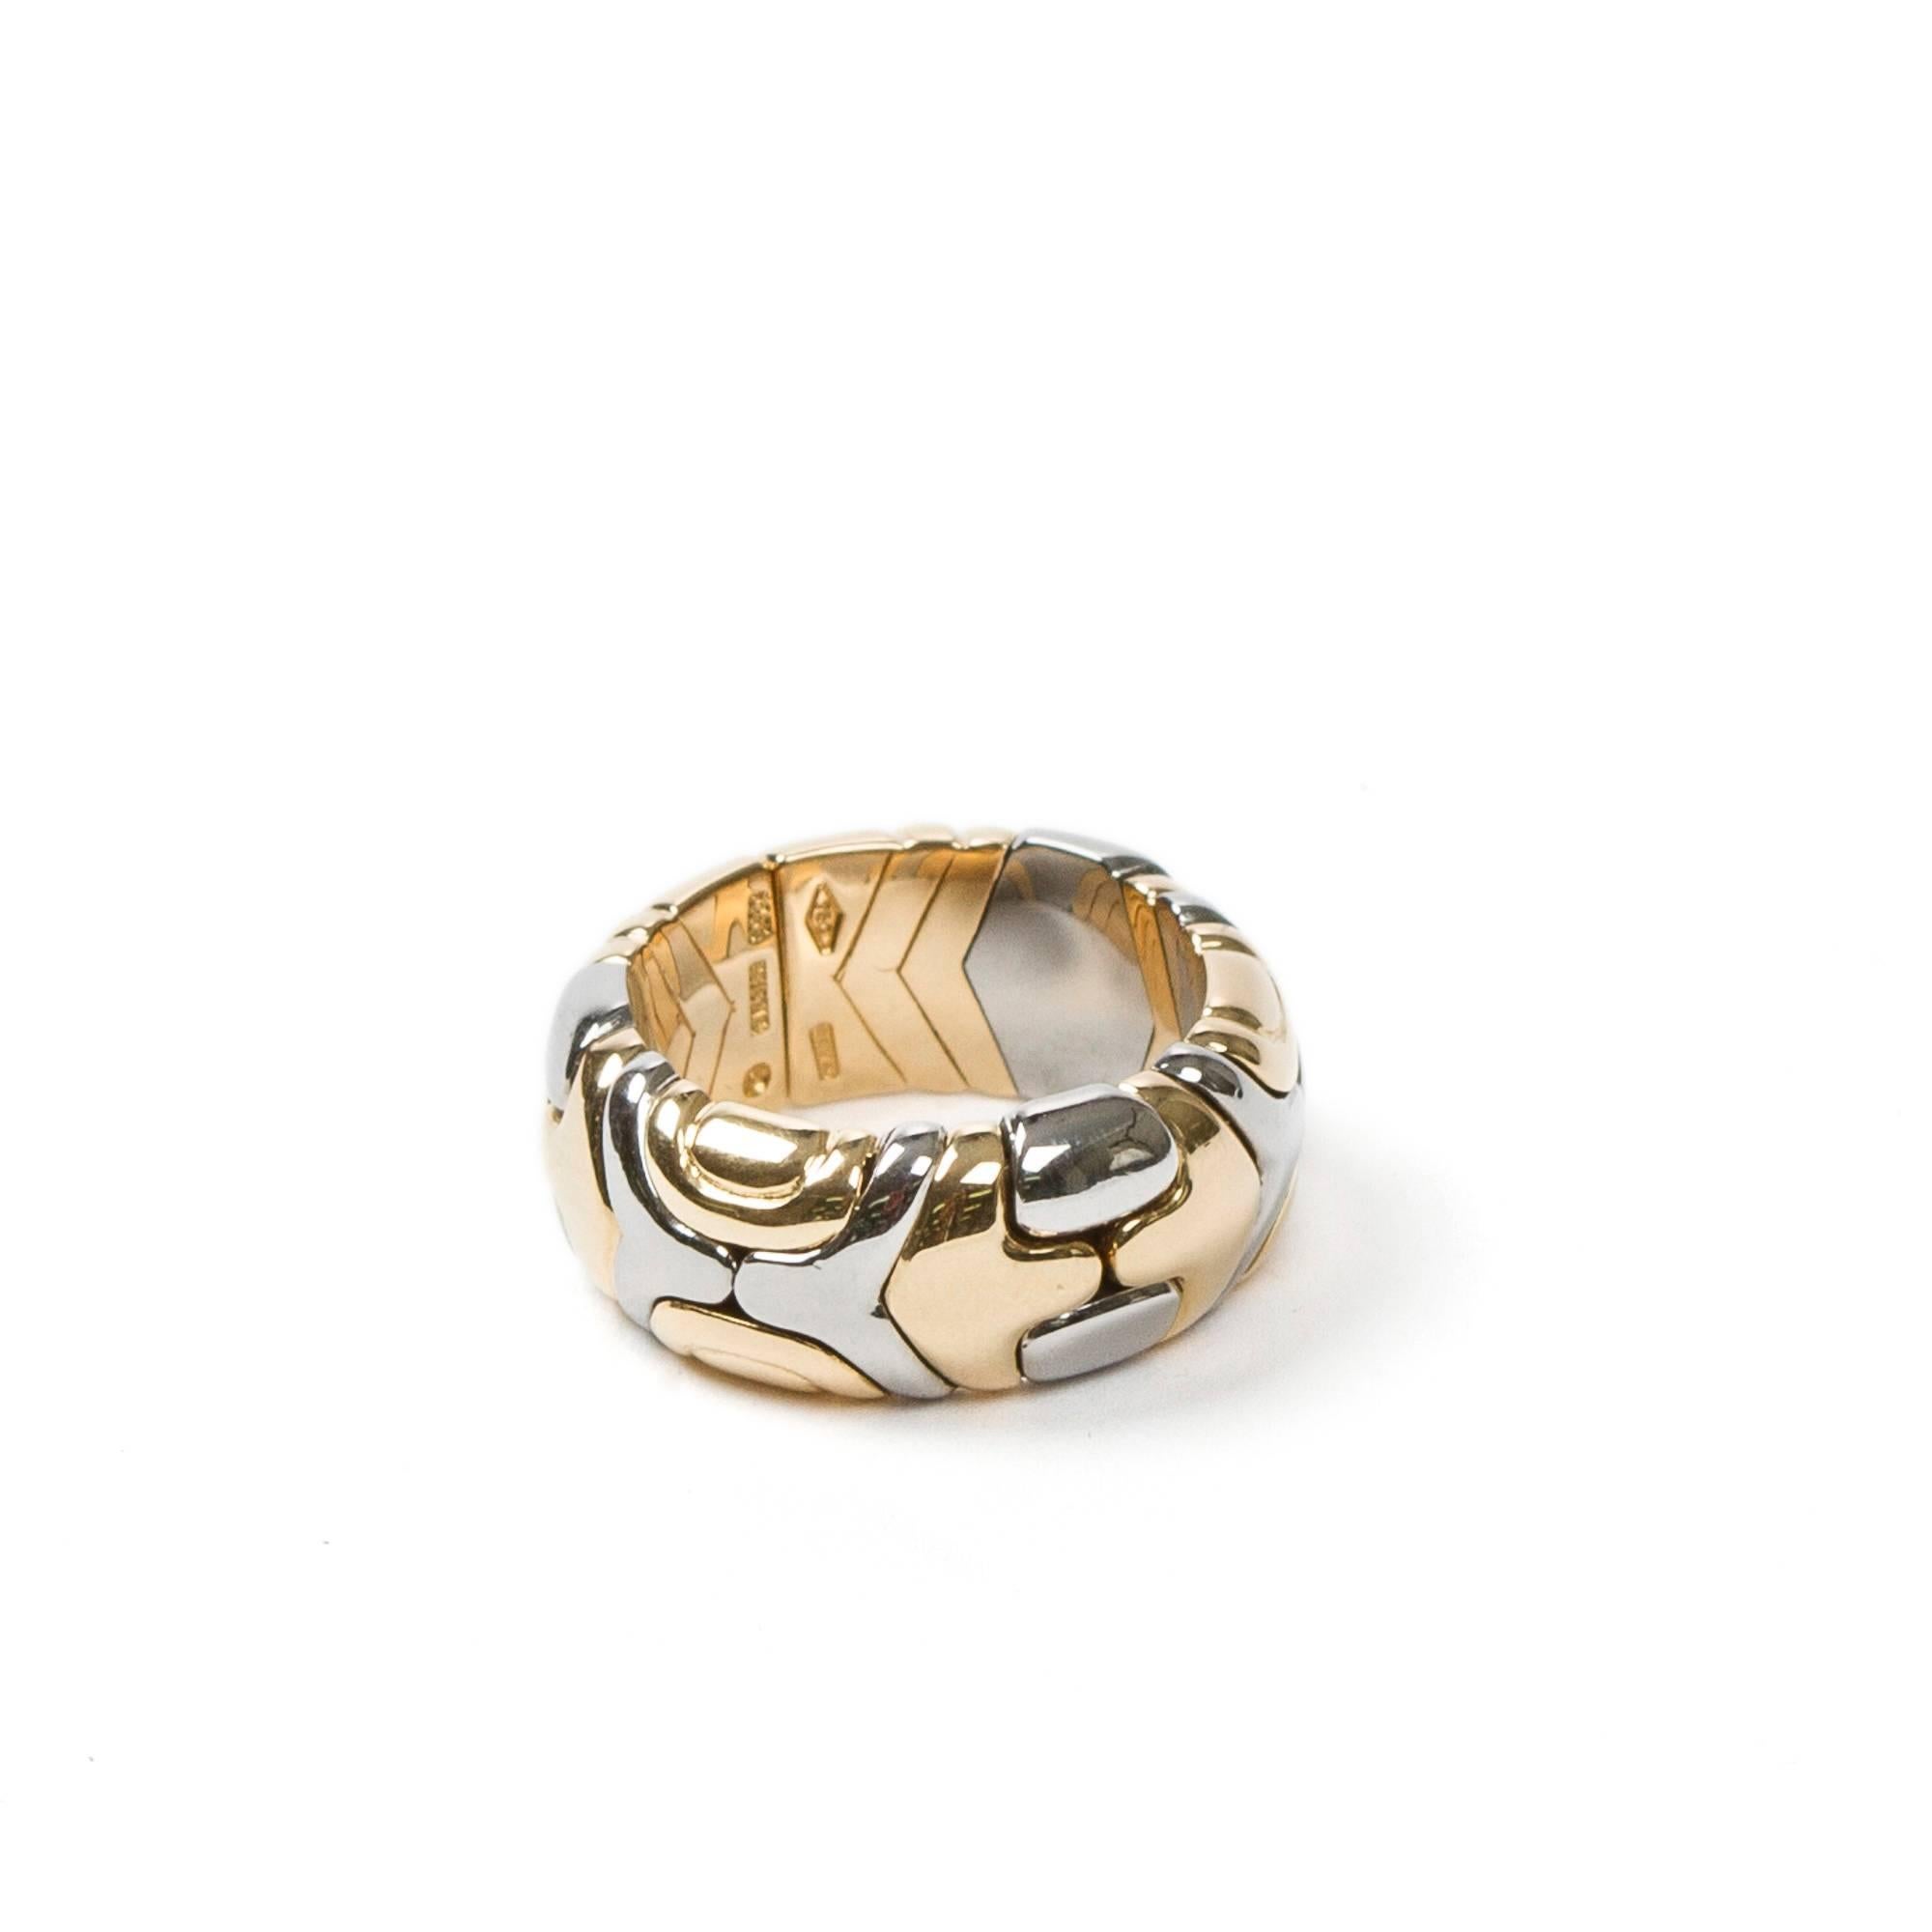 Alveare ring in 750 yellow gold and stainless steel. Hallmarks inside of the ring 